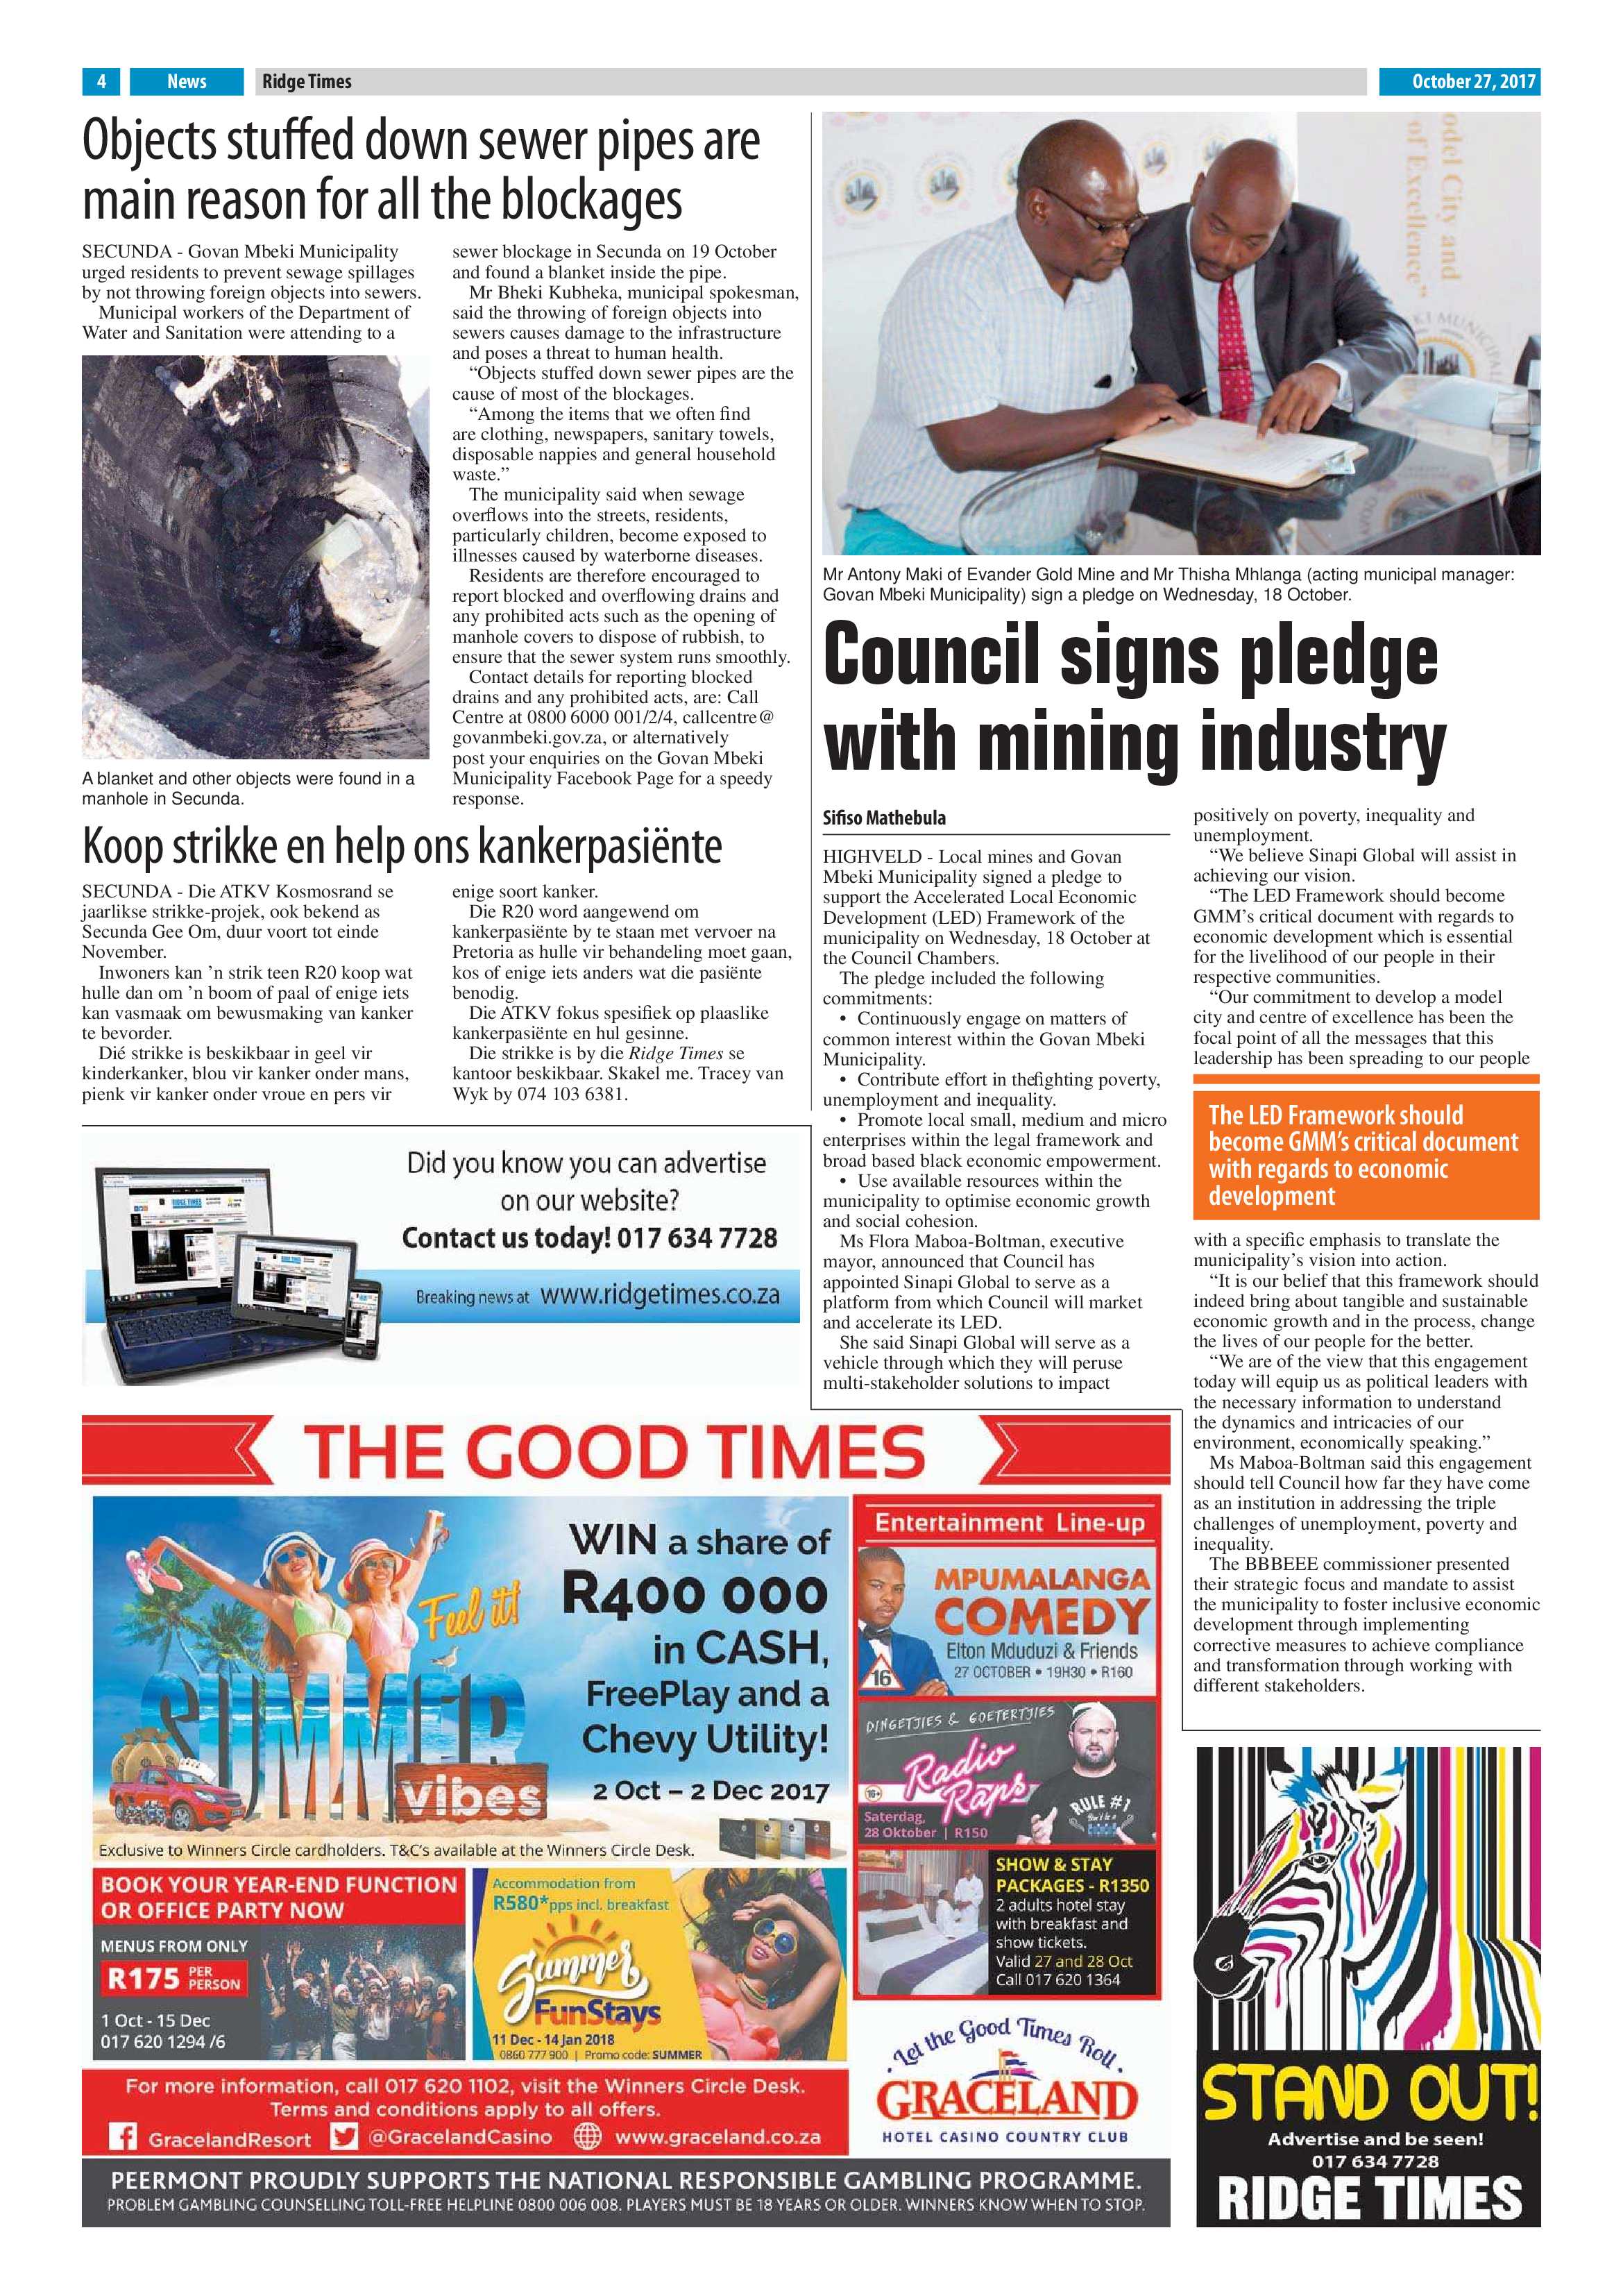 Ridge Times, 27 October 2017 page 4